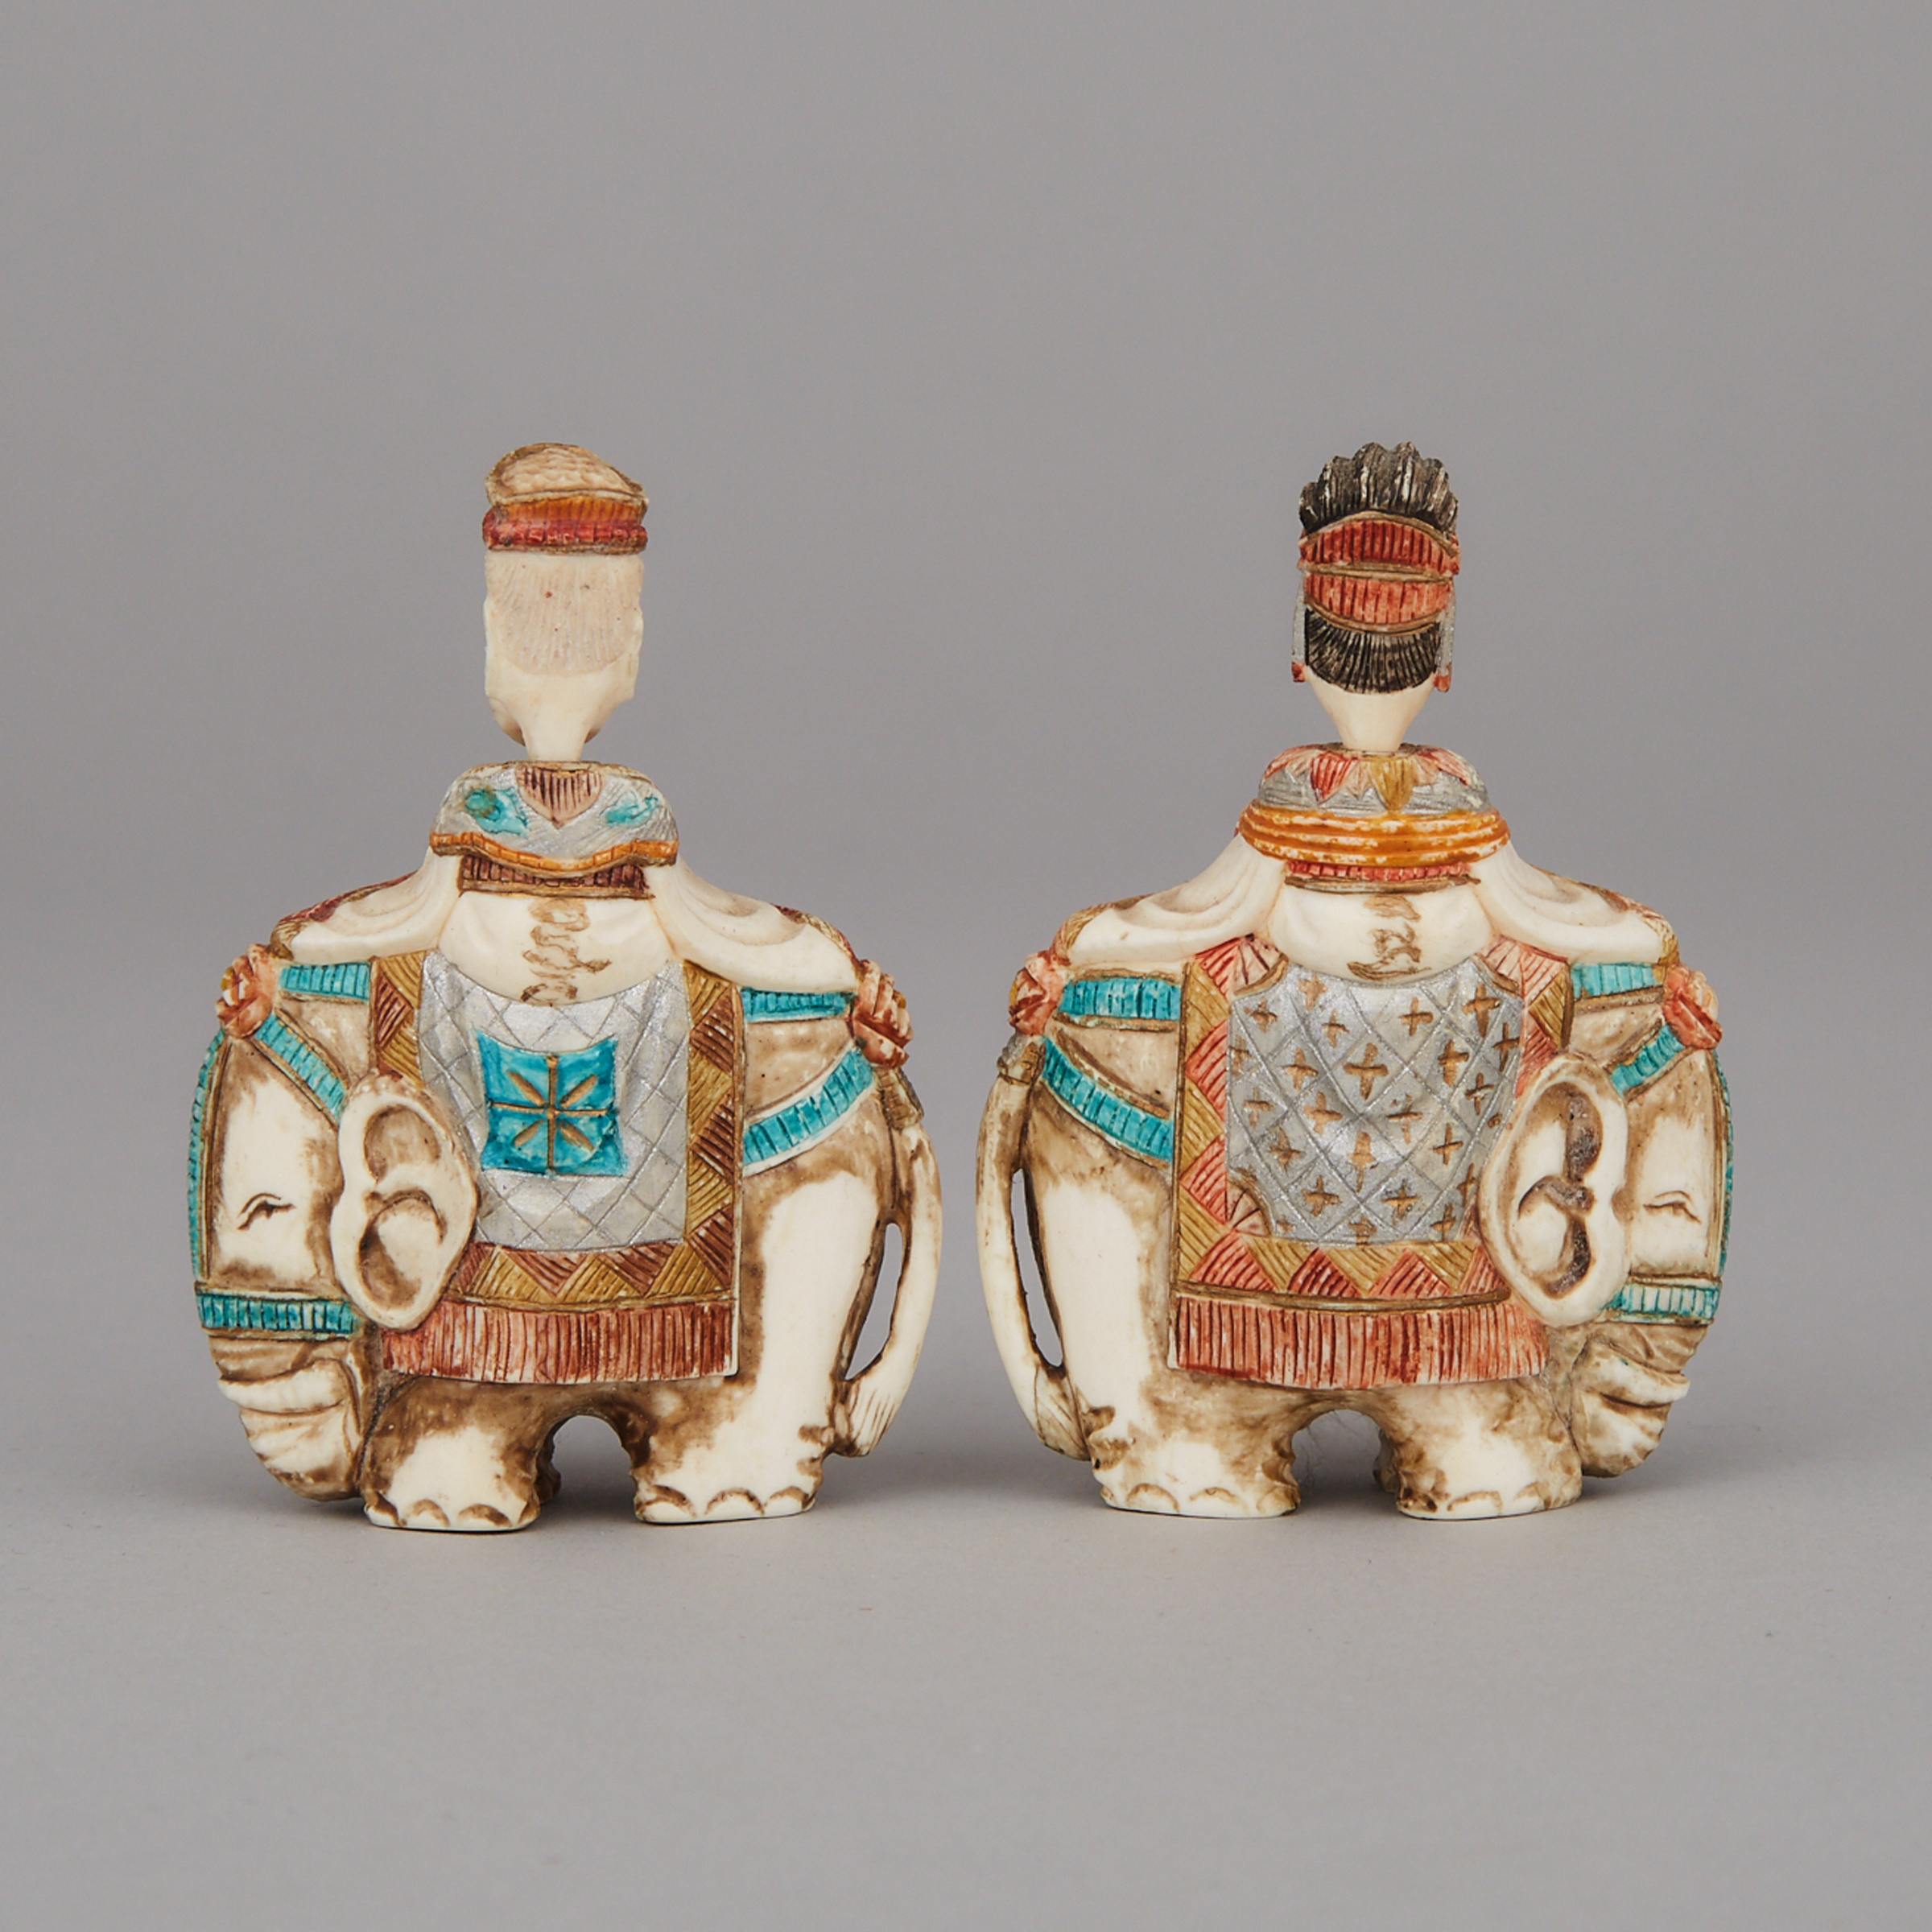 A Pair of Ivory Snuff Bottle Figures, 19th Century